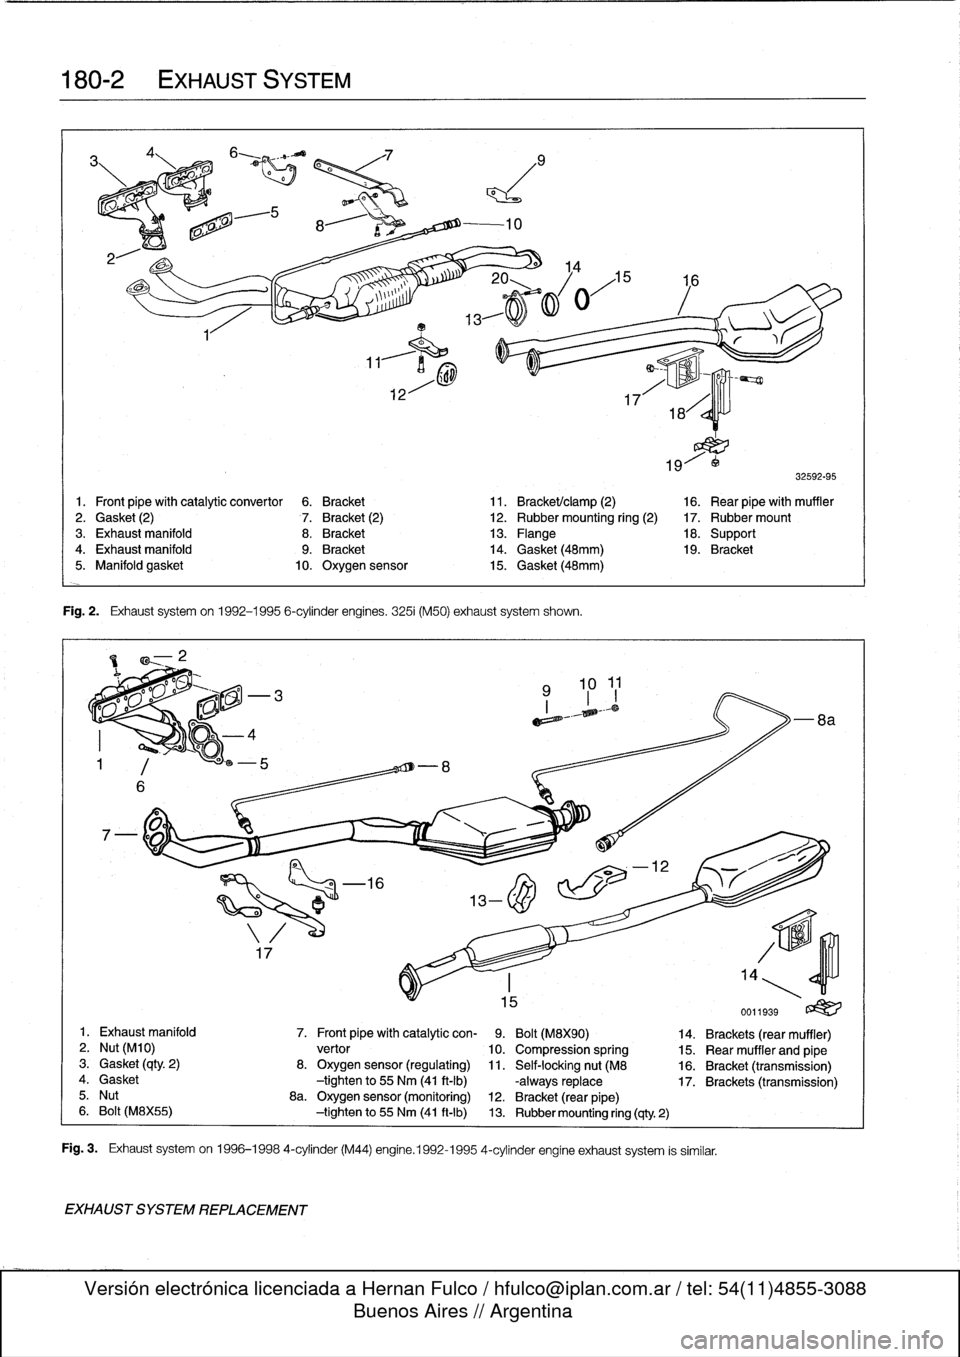 BMW 318i 1997 E36 User Guide 
180-2

	

EXHAUST
SYSTEM

a

EXHAUST
SYSTEM
REPLACEMENT

Fig
.
2
.

	

Exhaust
systemon
1992-1995
6-cylinder
engines
.
3251
(M50)
exhaust
system
shown
.

E~

)l-,malo
m~=

i

32592-95

1
.

	

Front
